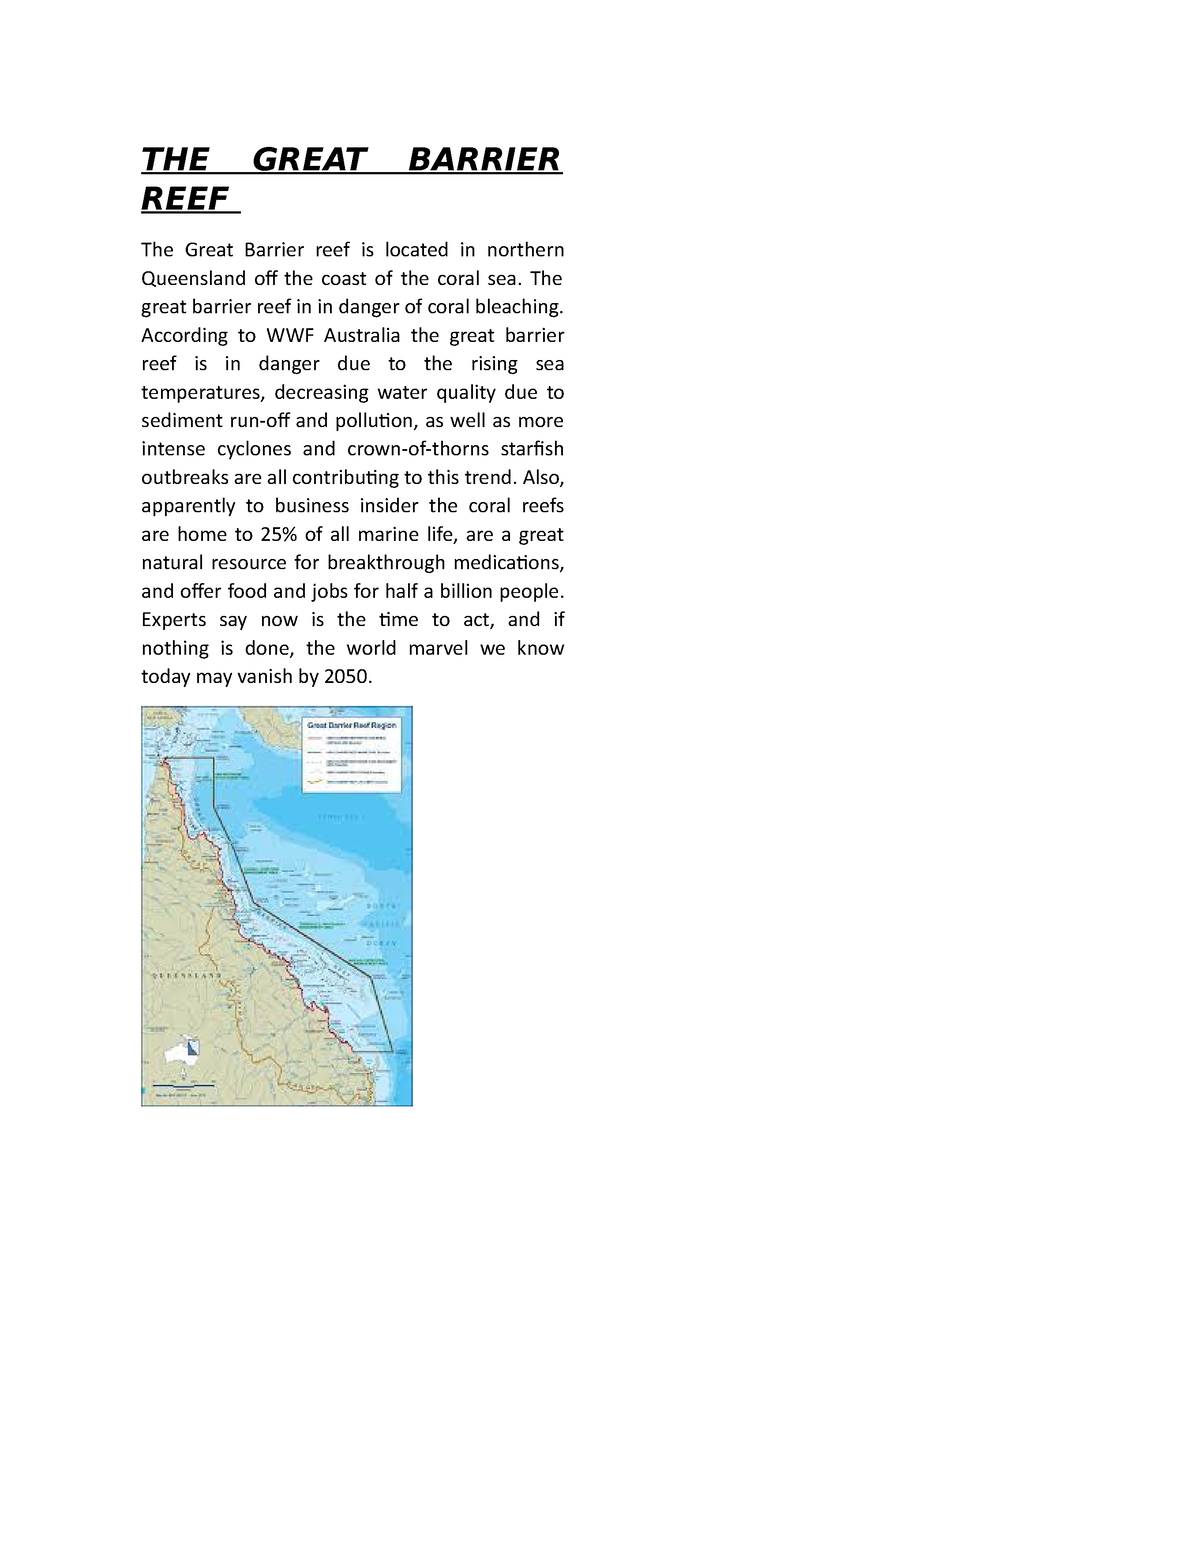 The Great Barrier Reef - EXAMPLE - THE GREAT BARRIER REEF The Great ...